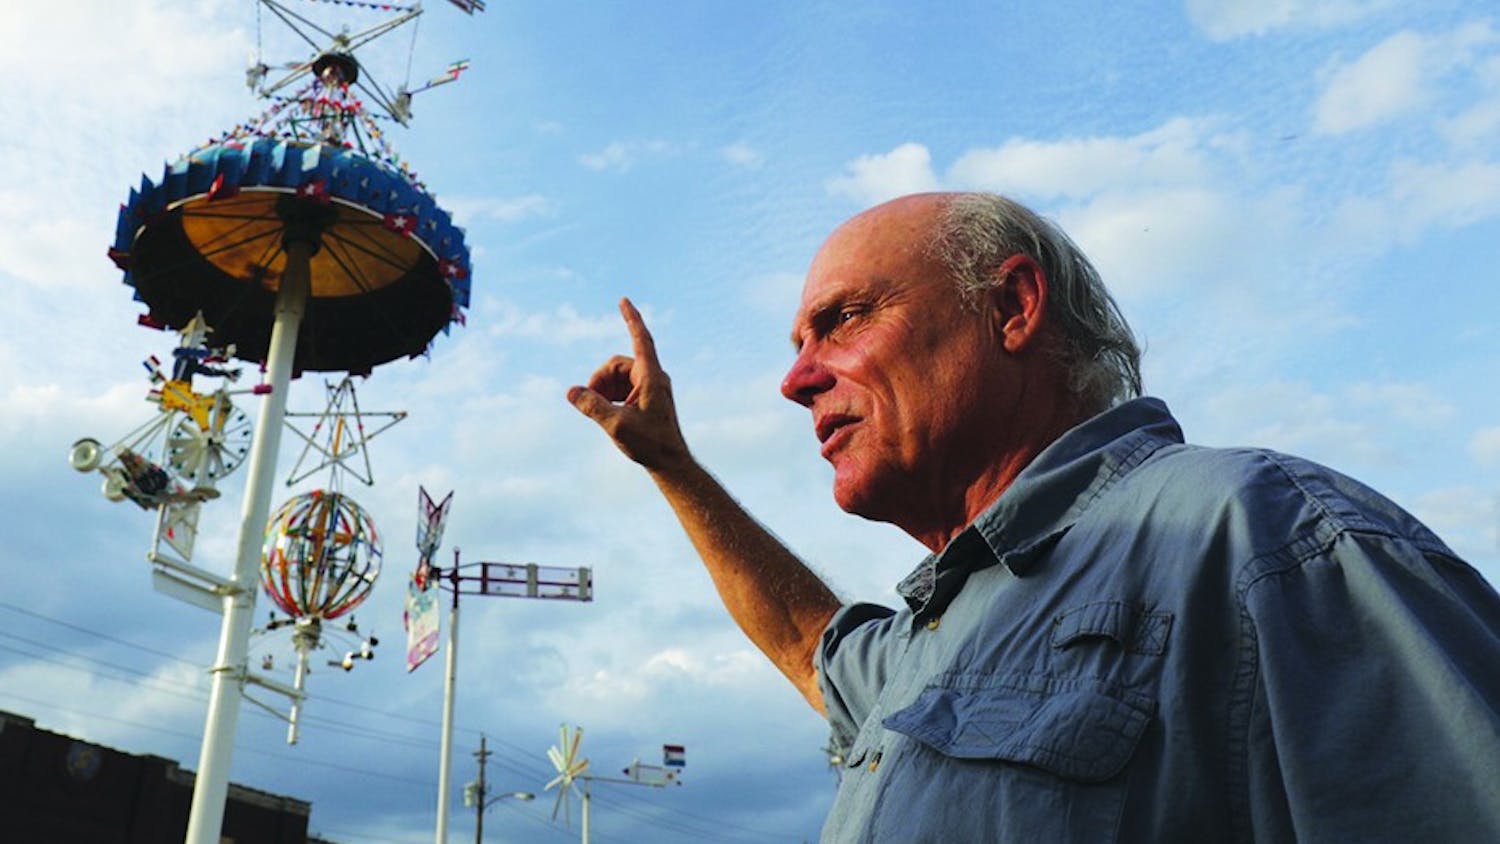 “When they’re turning and the light hits them, they just take on a different life,” said Joseph Justice, artist for the whirligig restoration effort in Wilson, N.C.